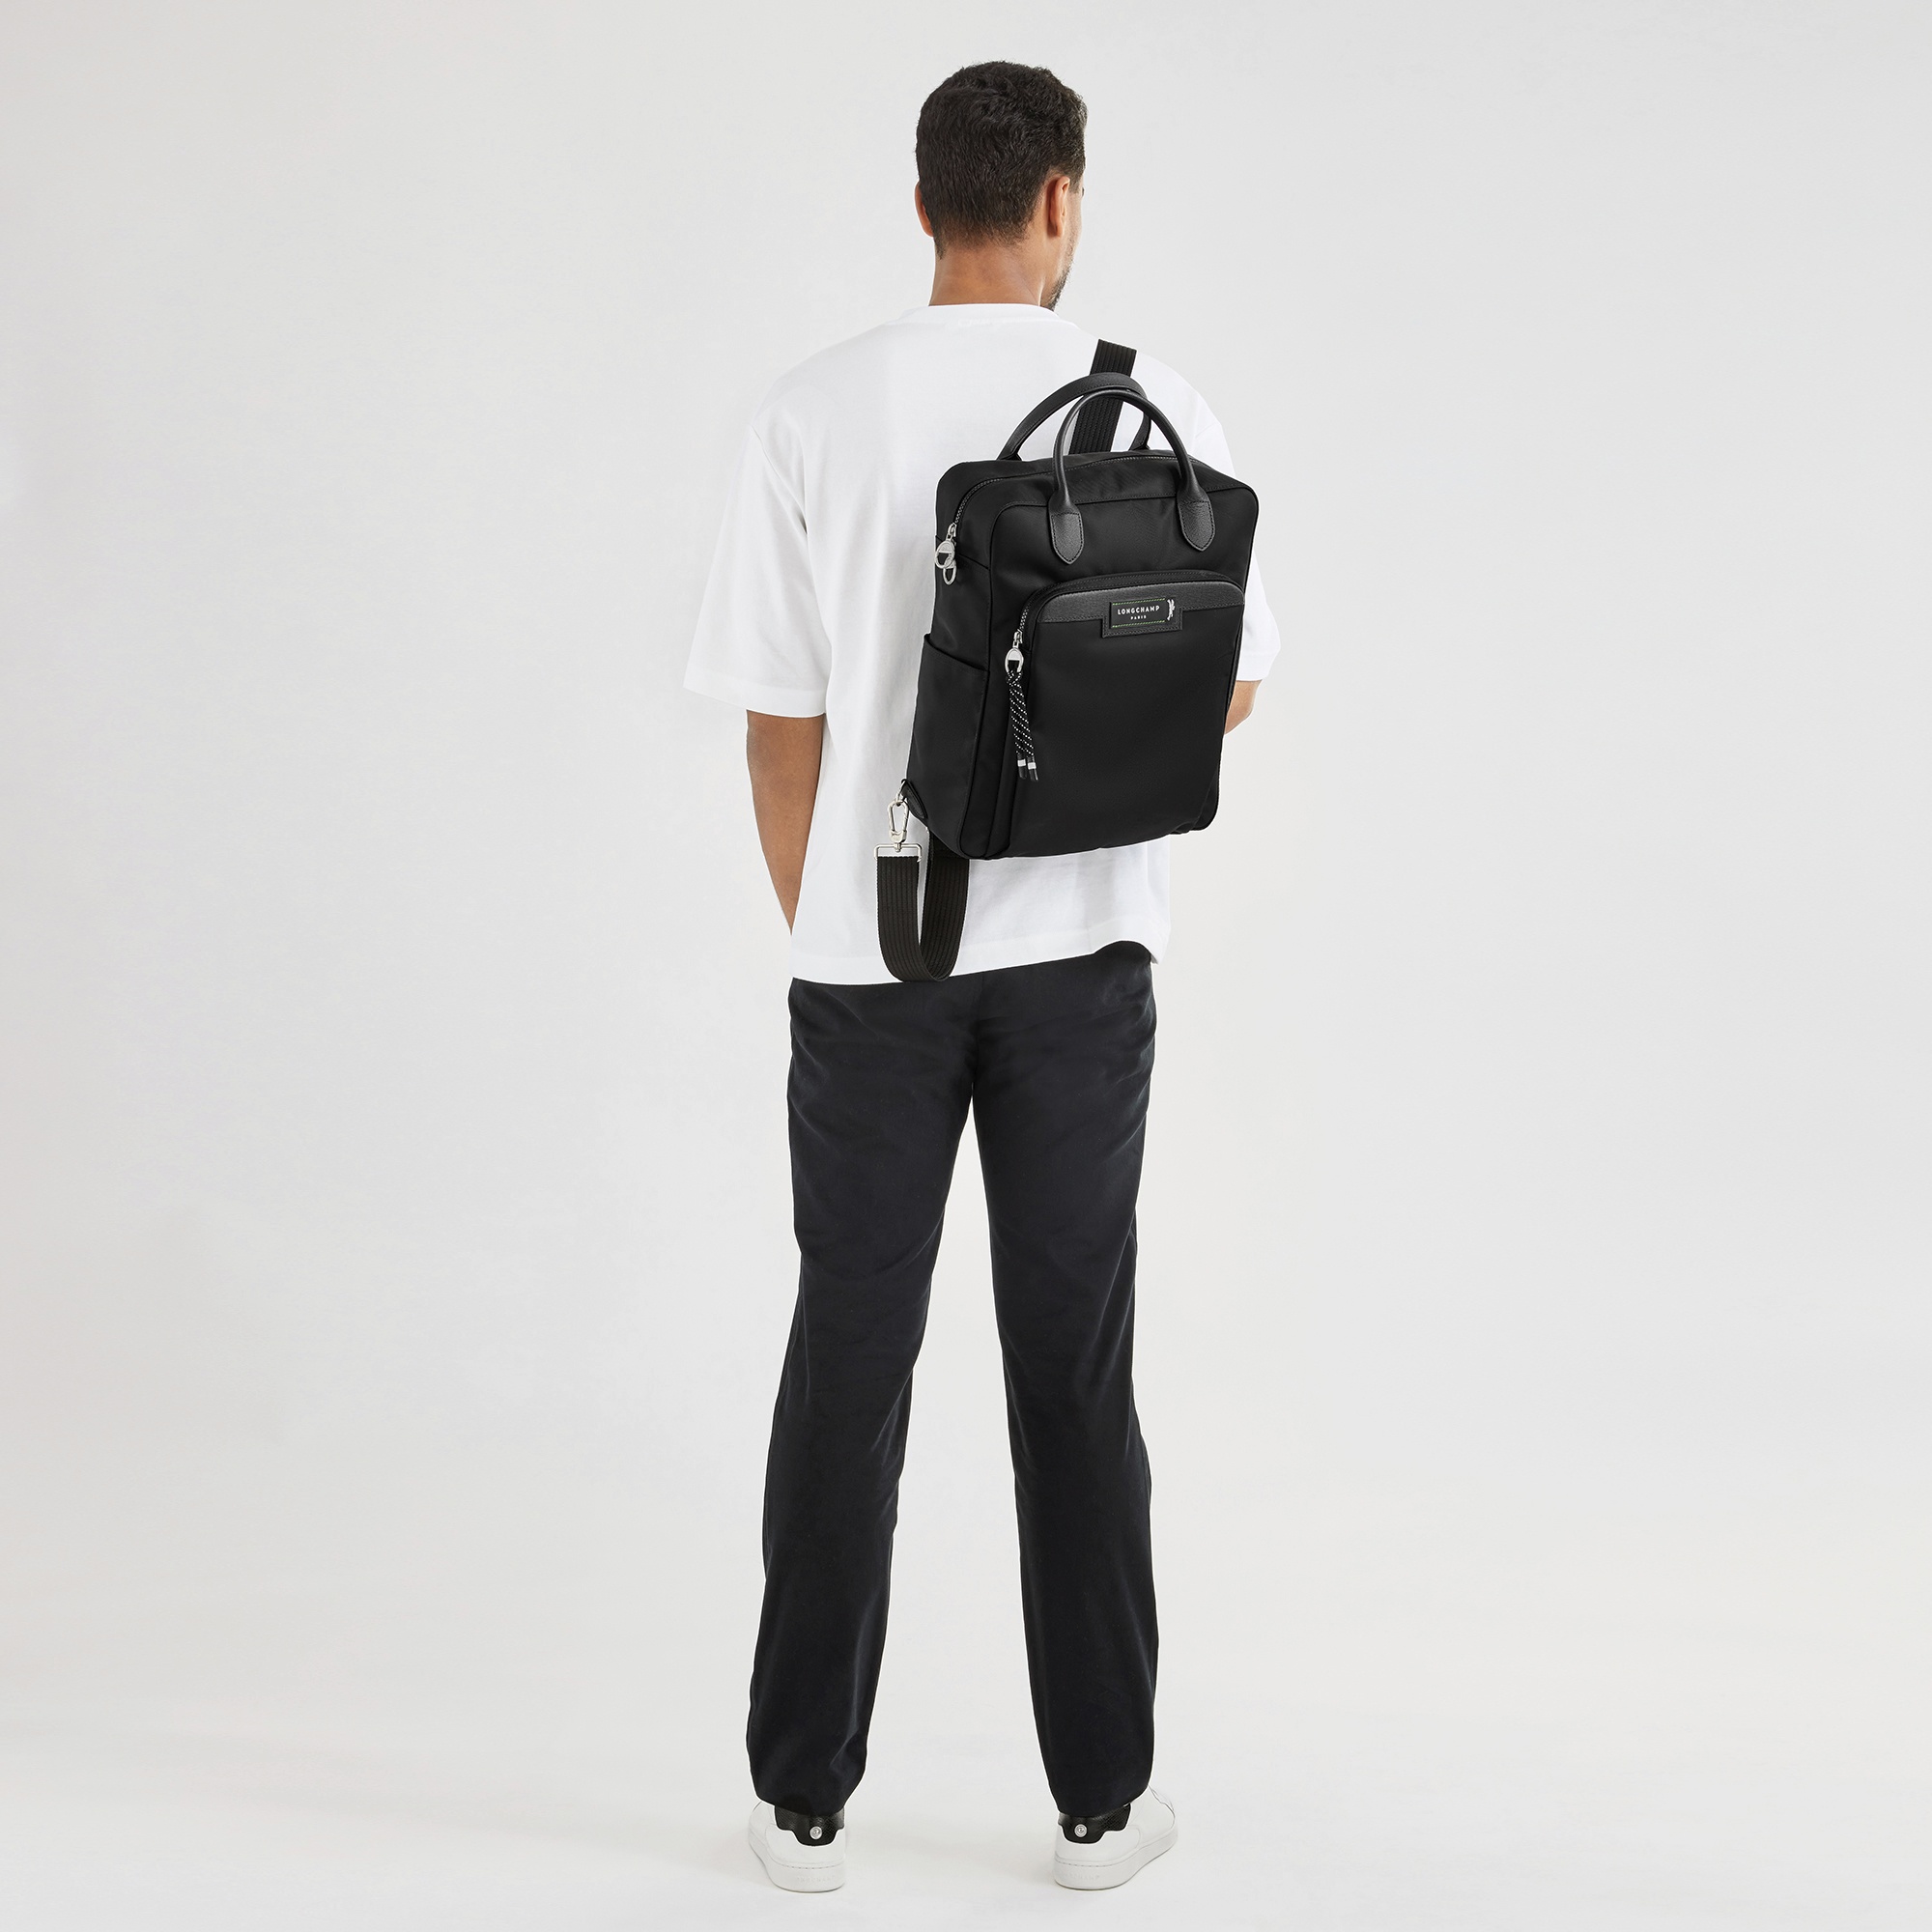 Le Pliage Energy M Backpack Black - Recycled canvas - 2